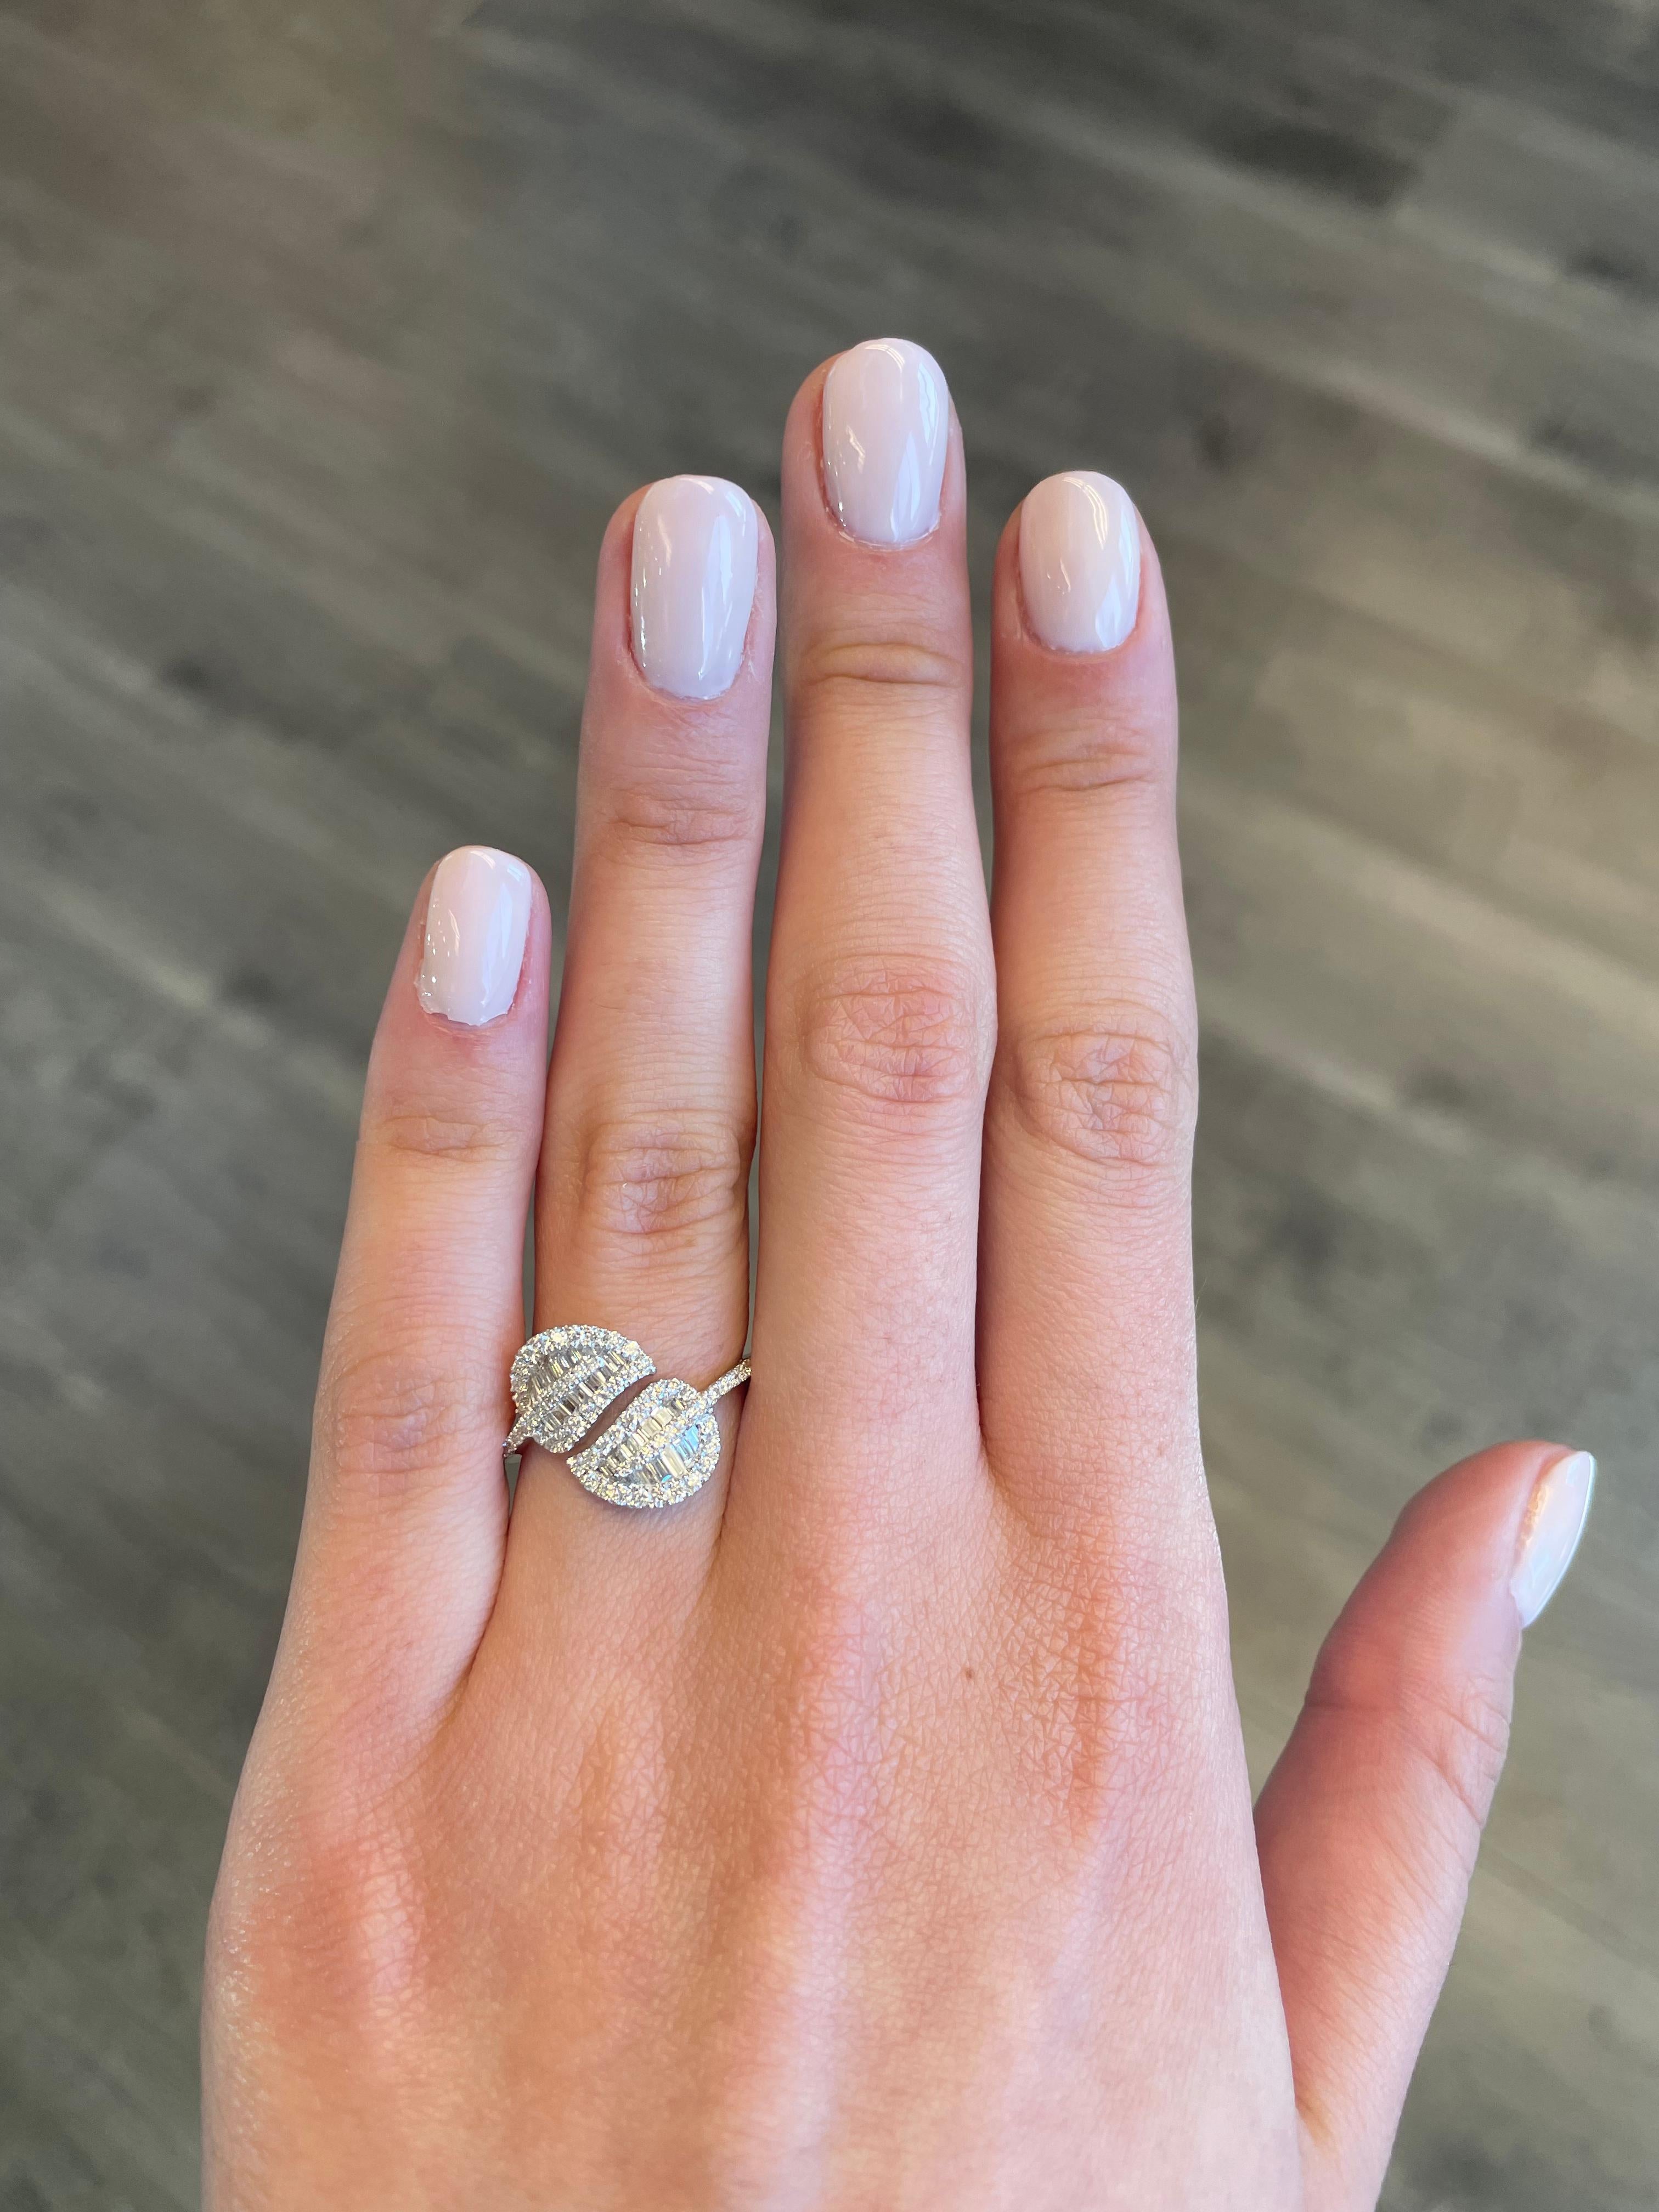 Stunning modern leaf motif bypass ring, by Alexander Beverly Hills.
100 round and baguette cut diamonds, 0.81 carats. Approximately G color grade and VS clarity grade. 18-karat white gold, 3.11 grams, current ring size 6.75.
Accommodated with an